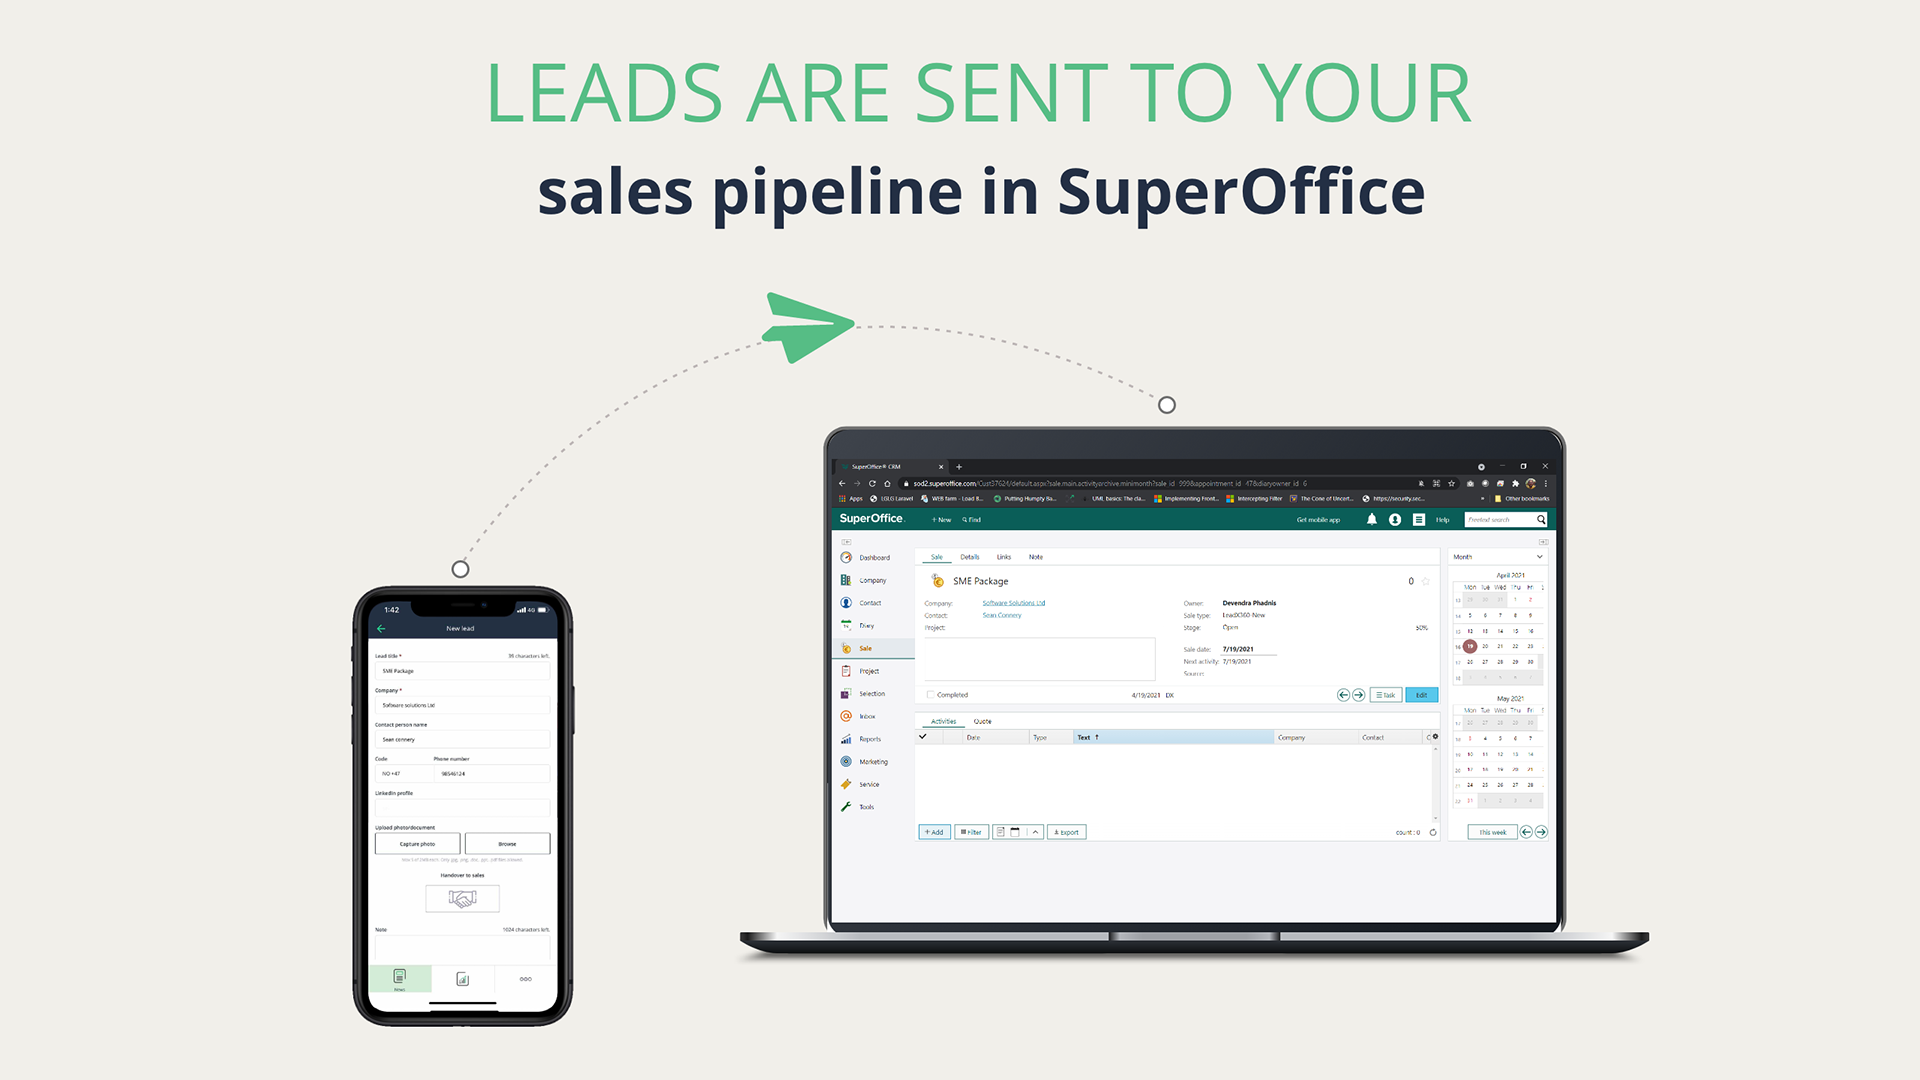 Send leads to your SuperOffice pipeline